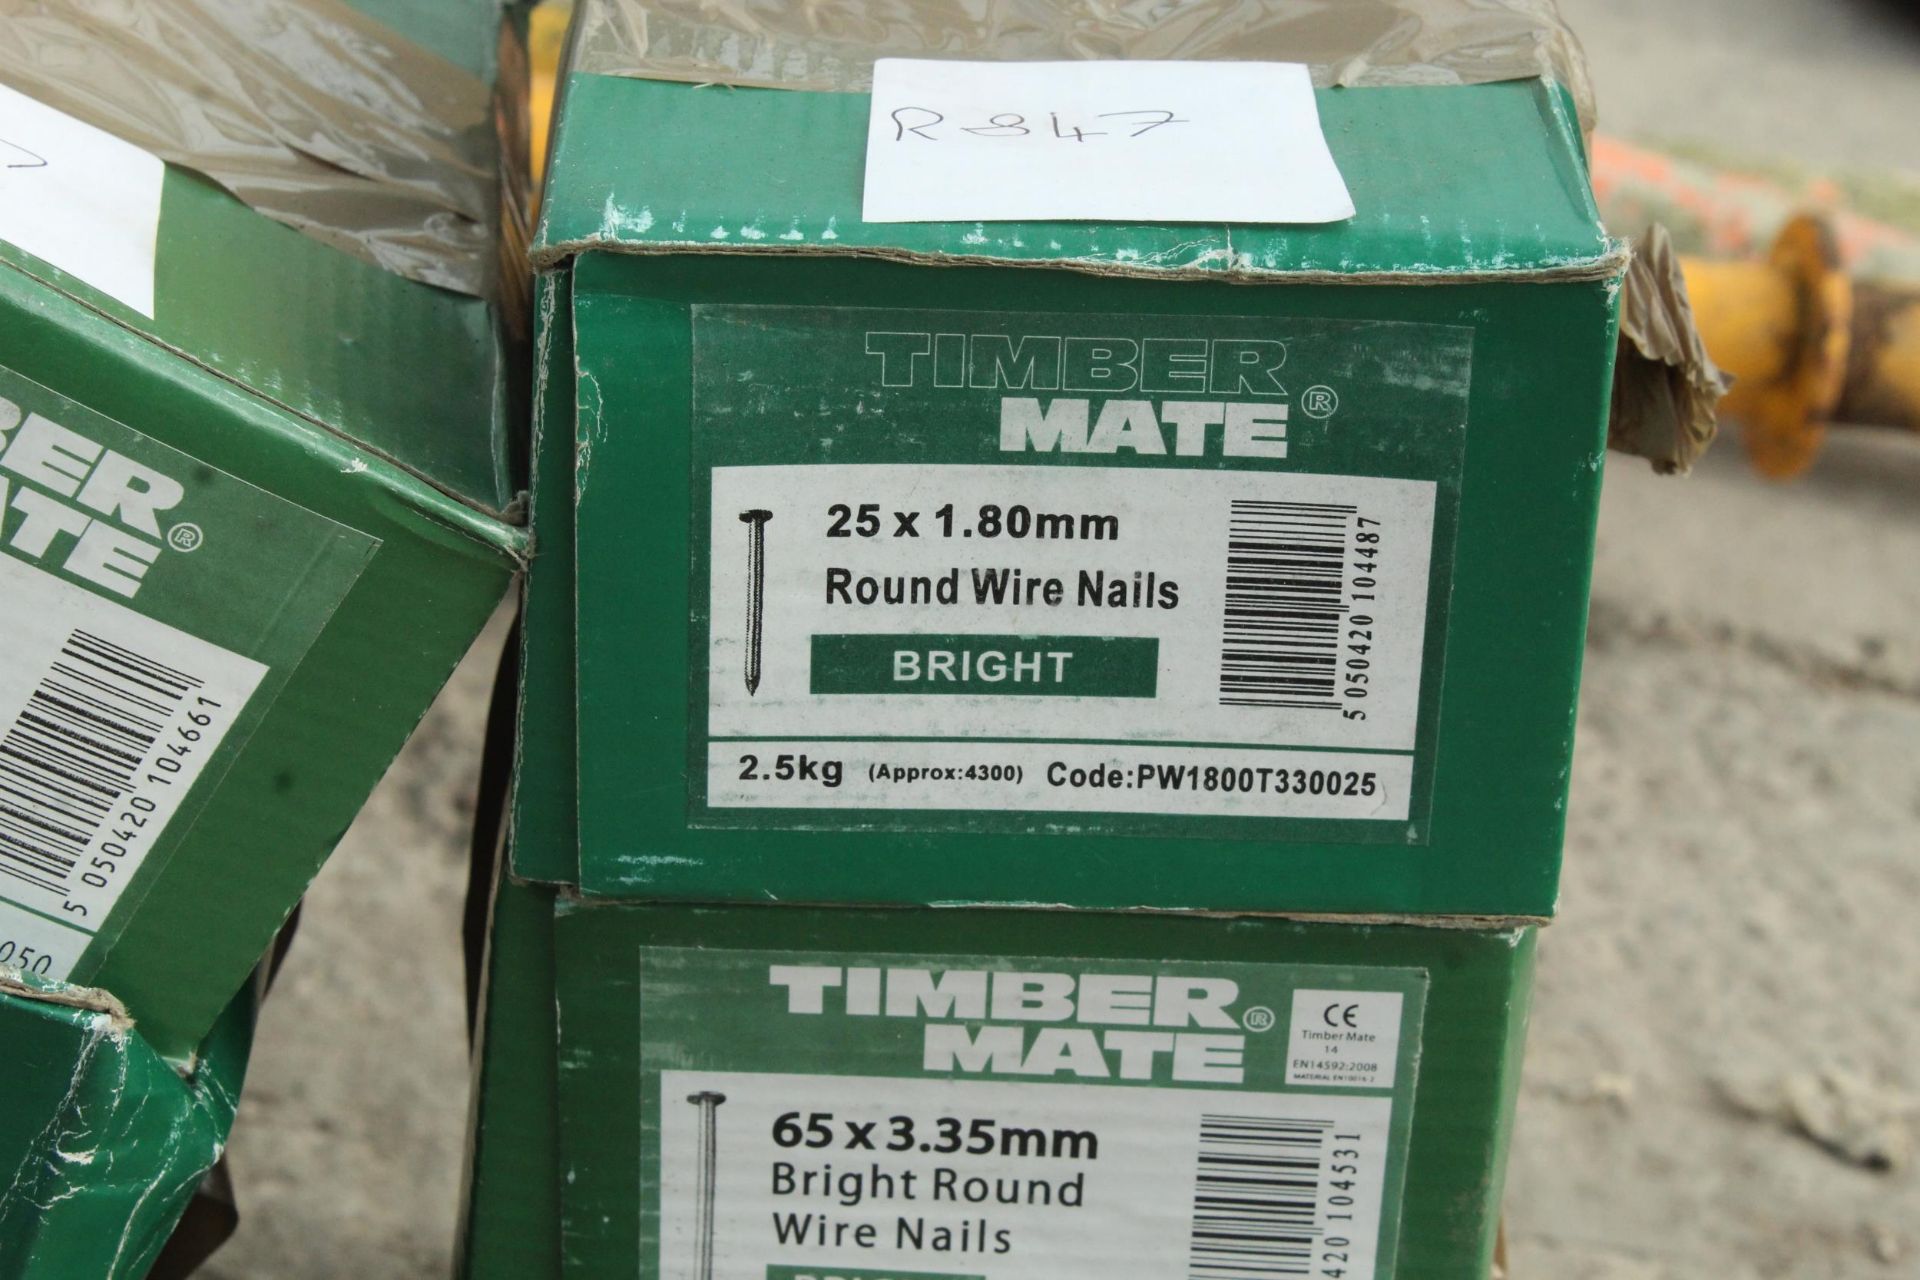 4 BOXES 50MM BRIGHT OVAL NAILS AND 4 BOXES ROUND WIRE NAILS+ VAT - Image 2 of 2